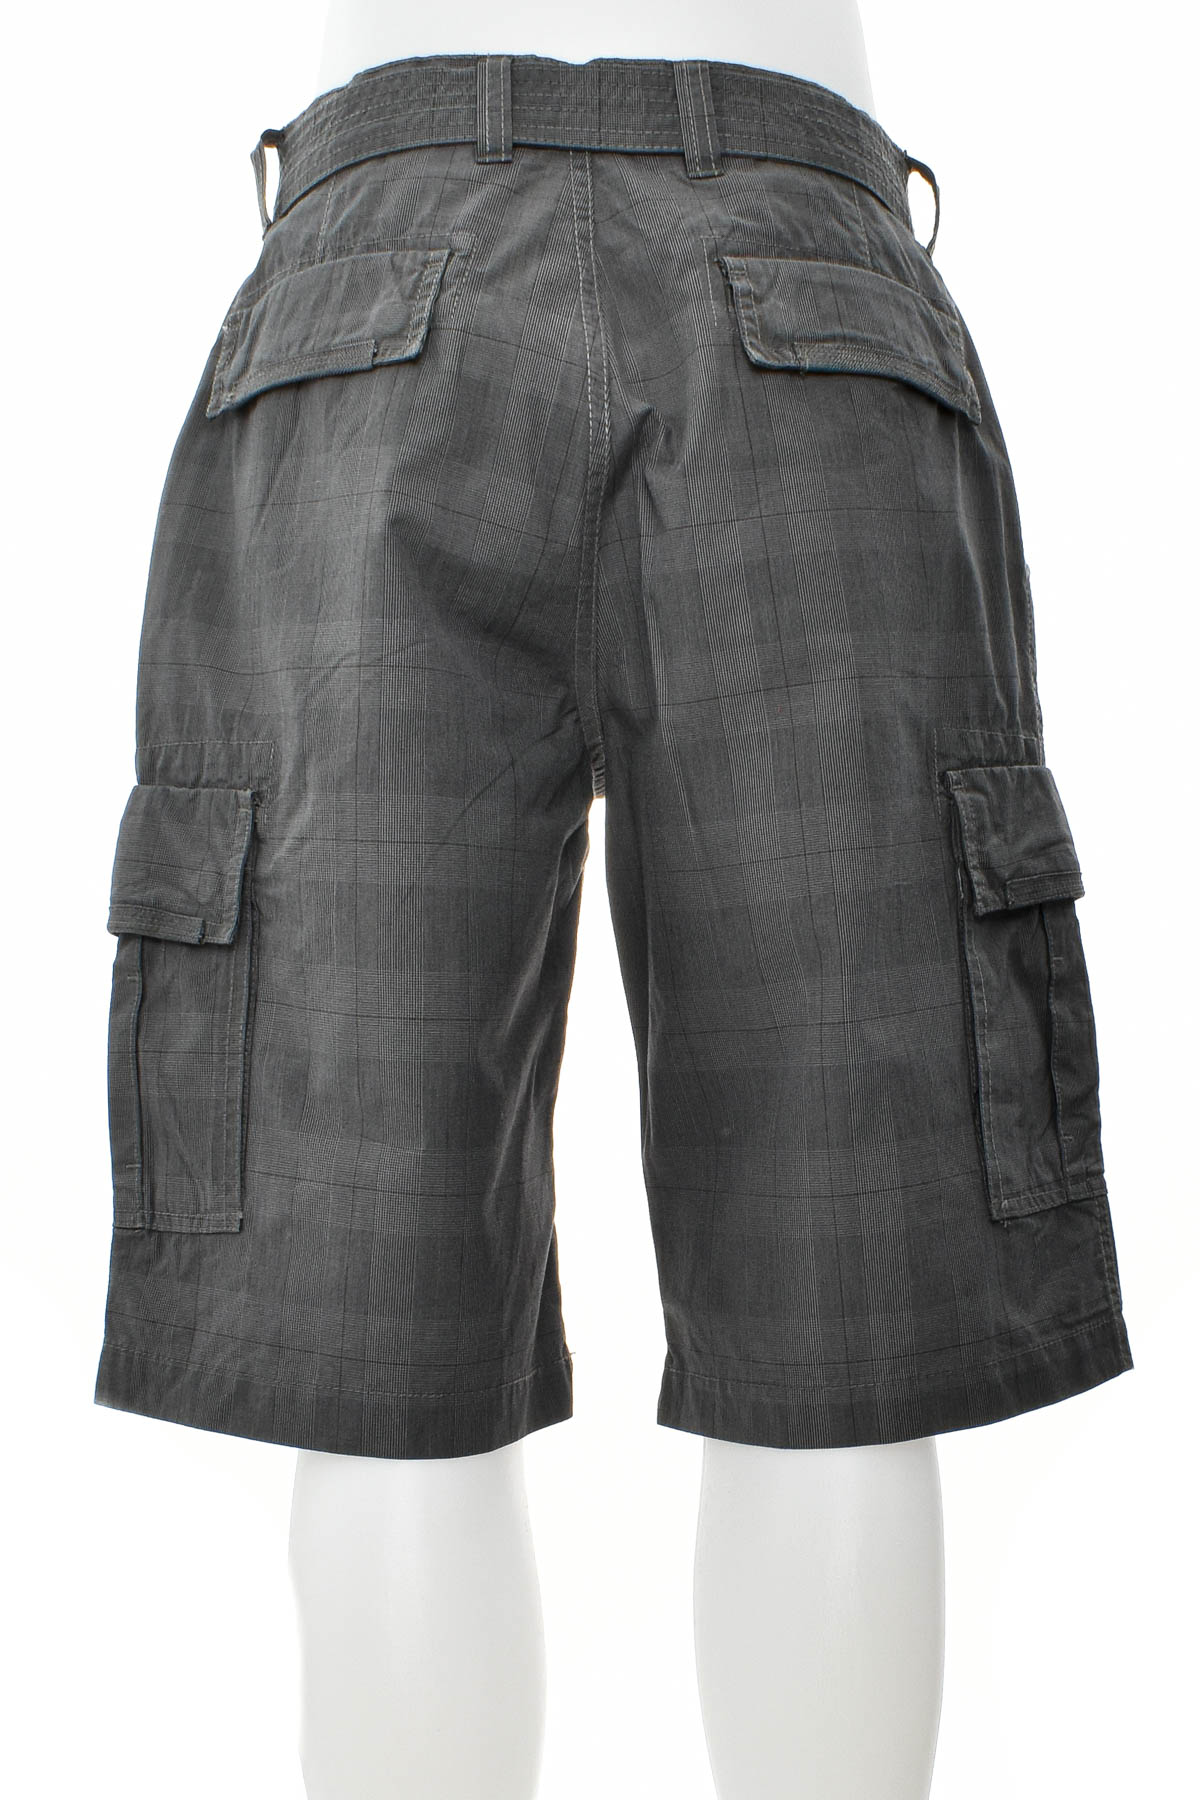 Men's shorts - Coolwater - 1